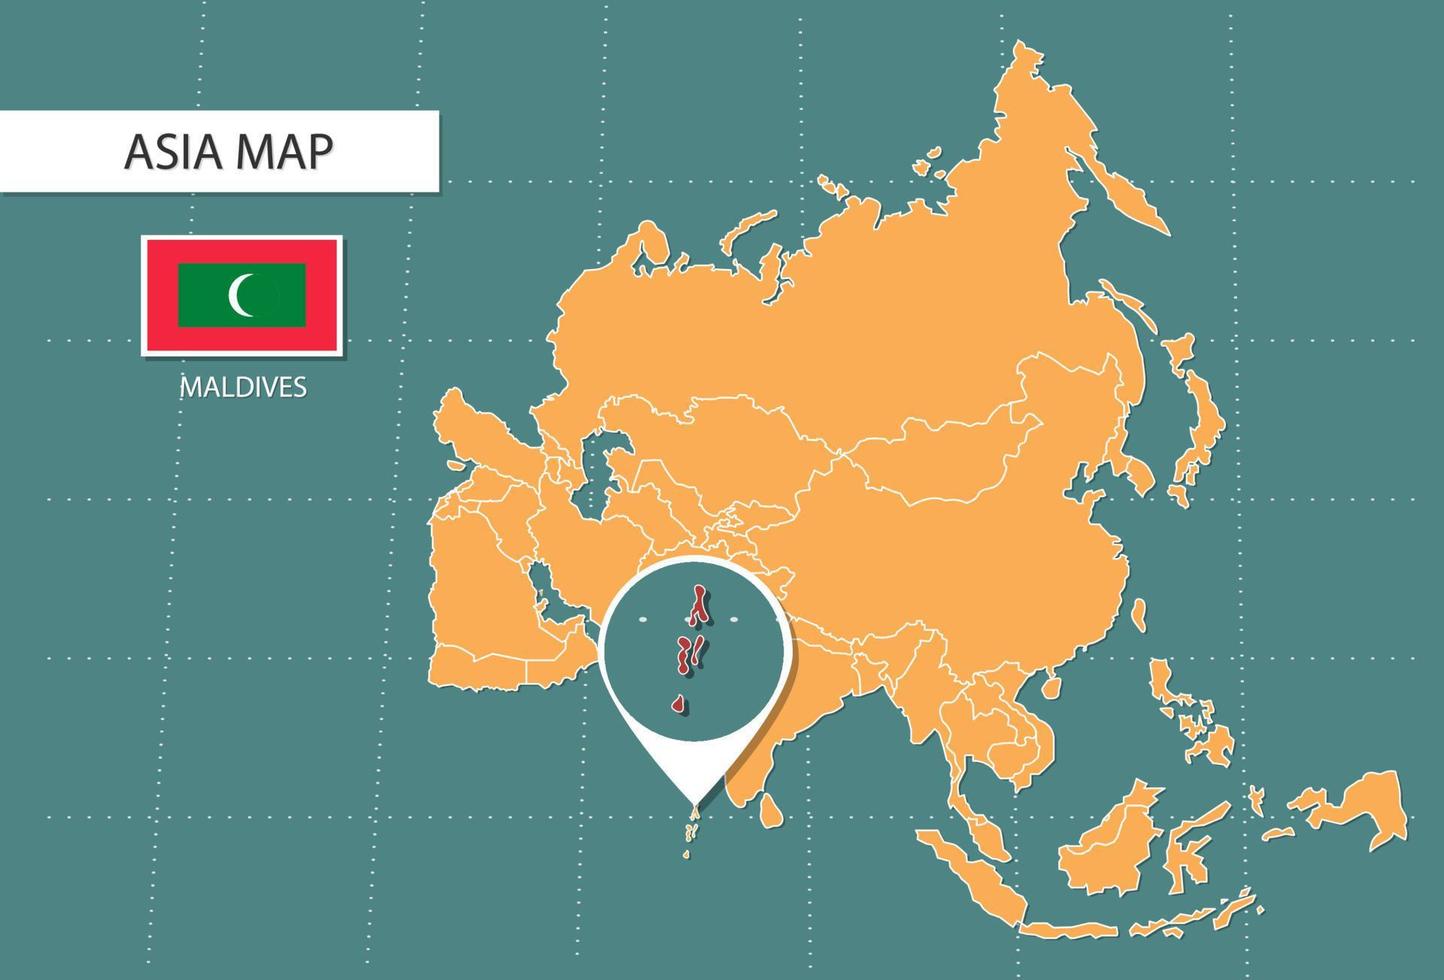 Maldives map in Asia zoom version, icons showing Maldives location and flags. vector